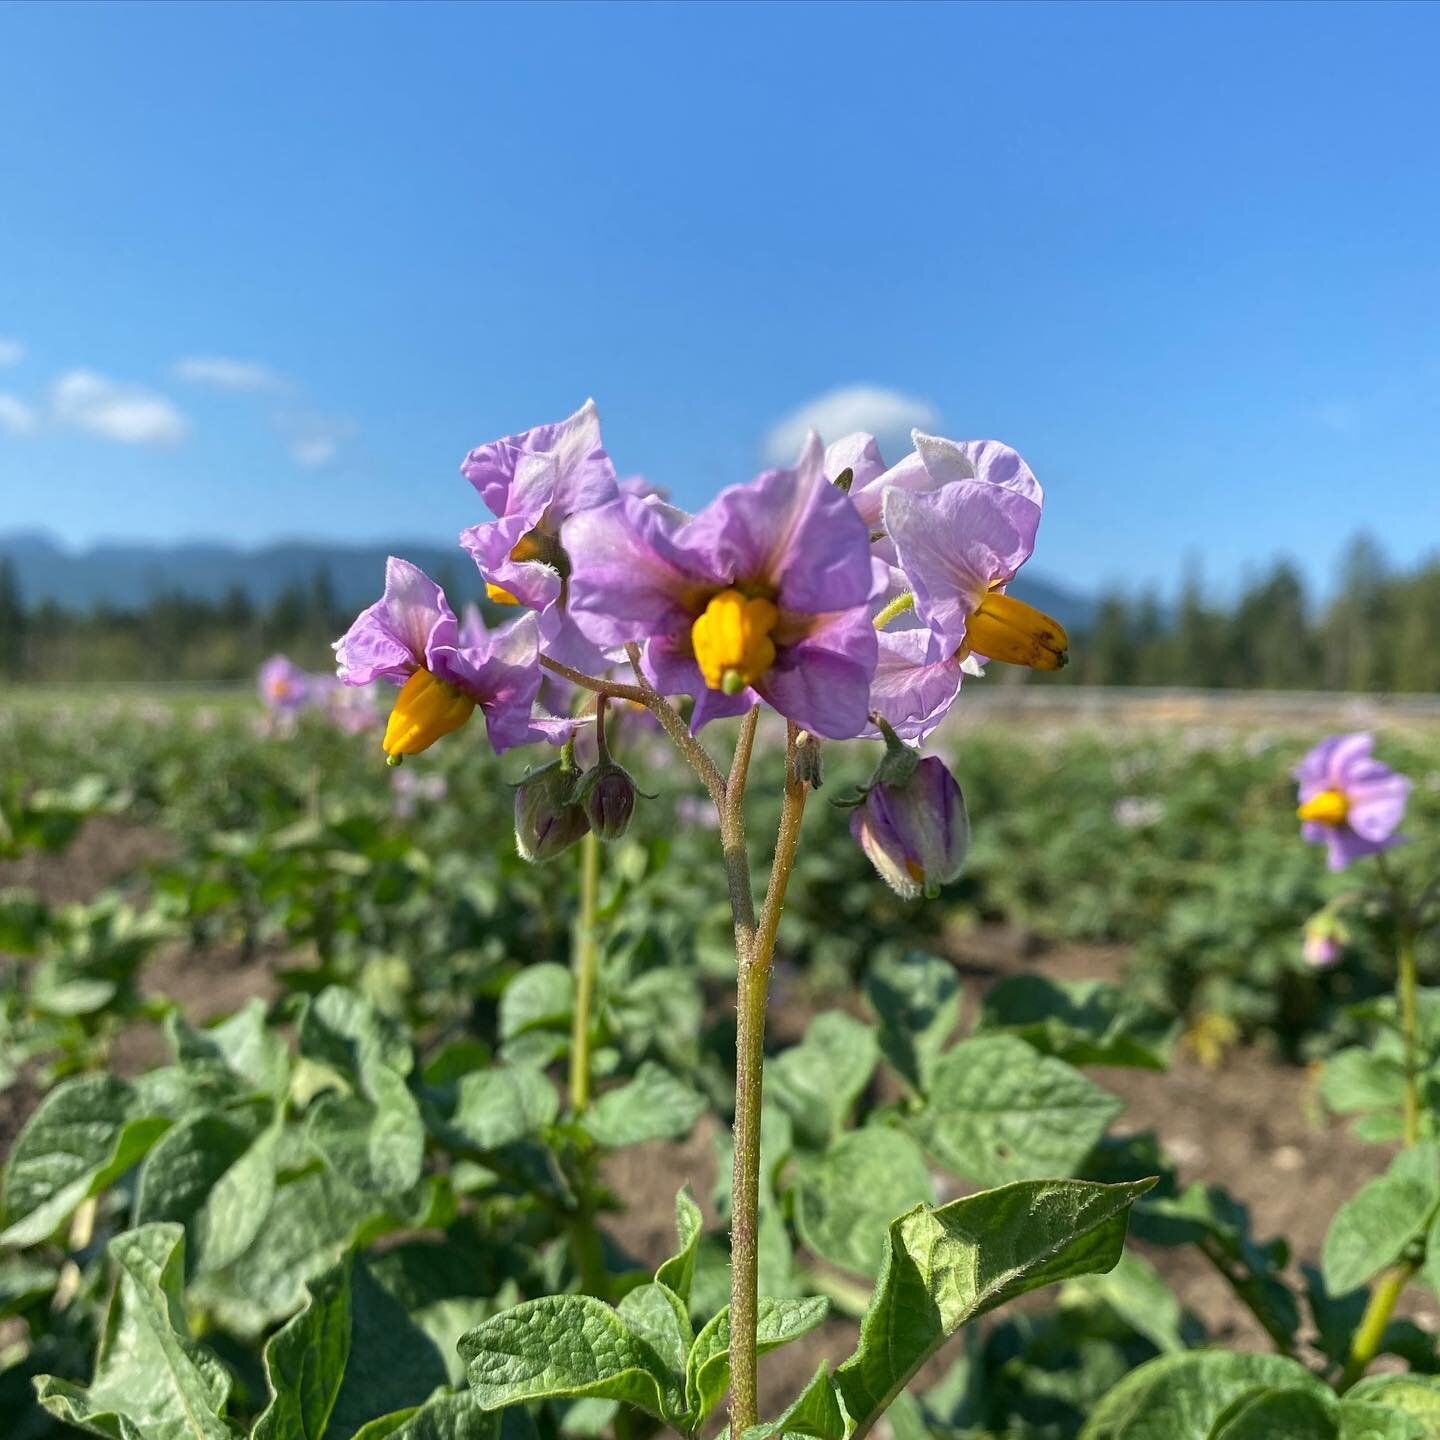 The beautiful potato flower! These are our red variety which are coming along beeautifully 🥔🐝💜